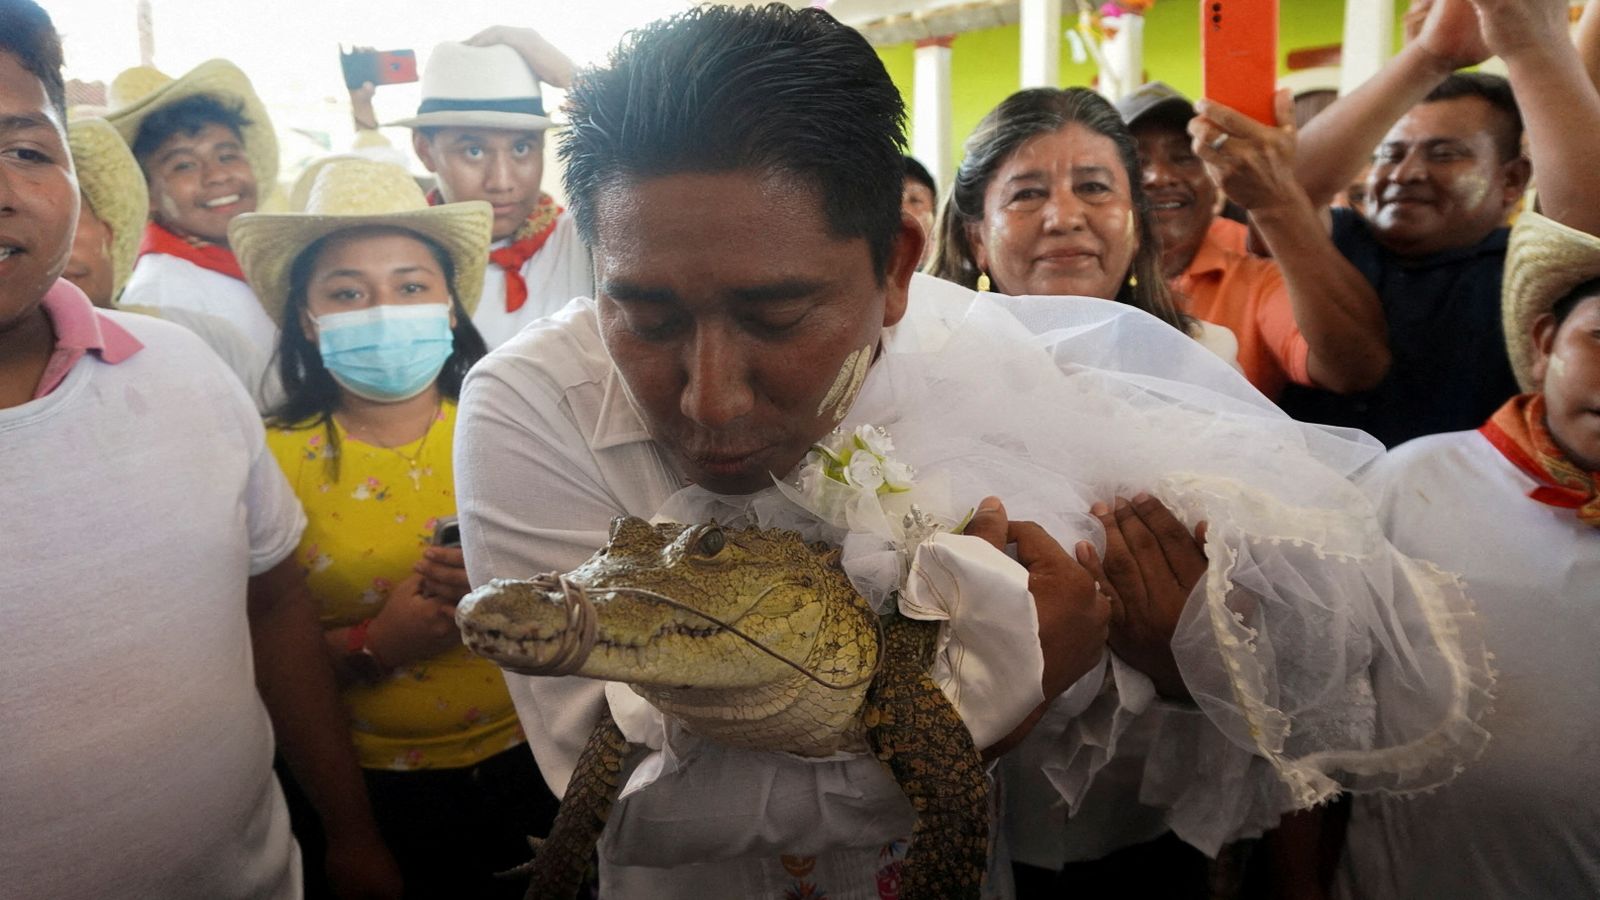 Mexican mayor marries croccodile ‘to bring fortune’ to his people